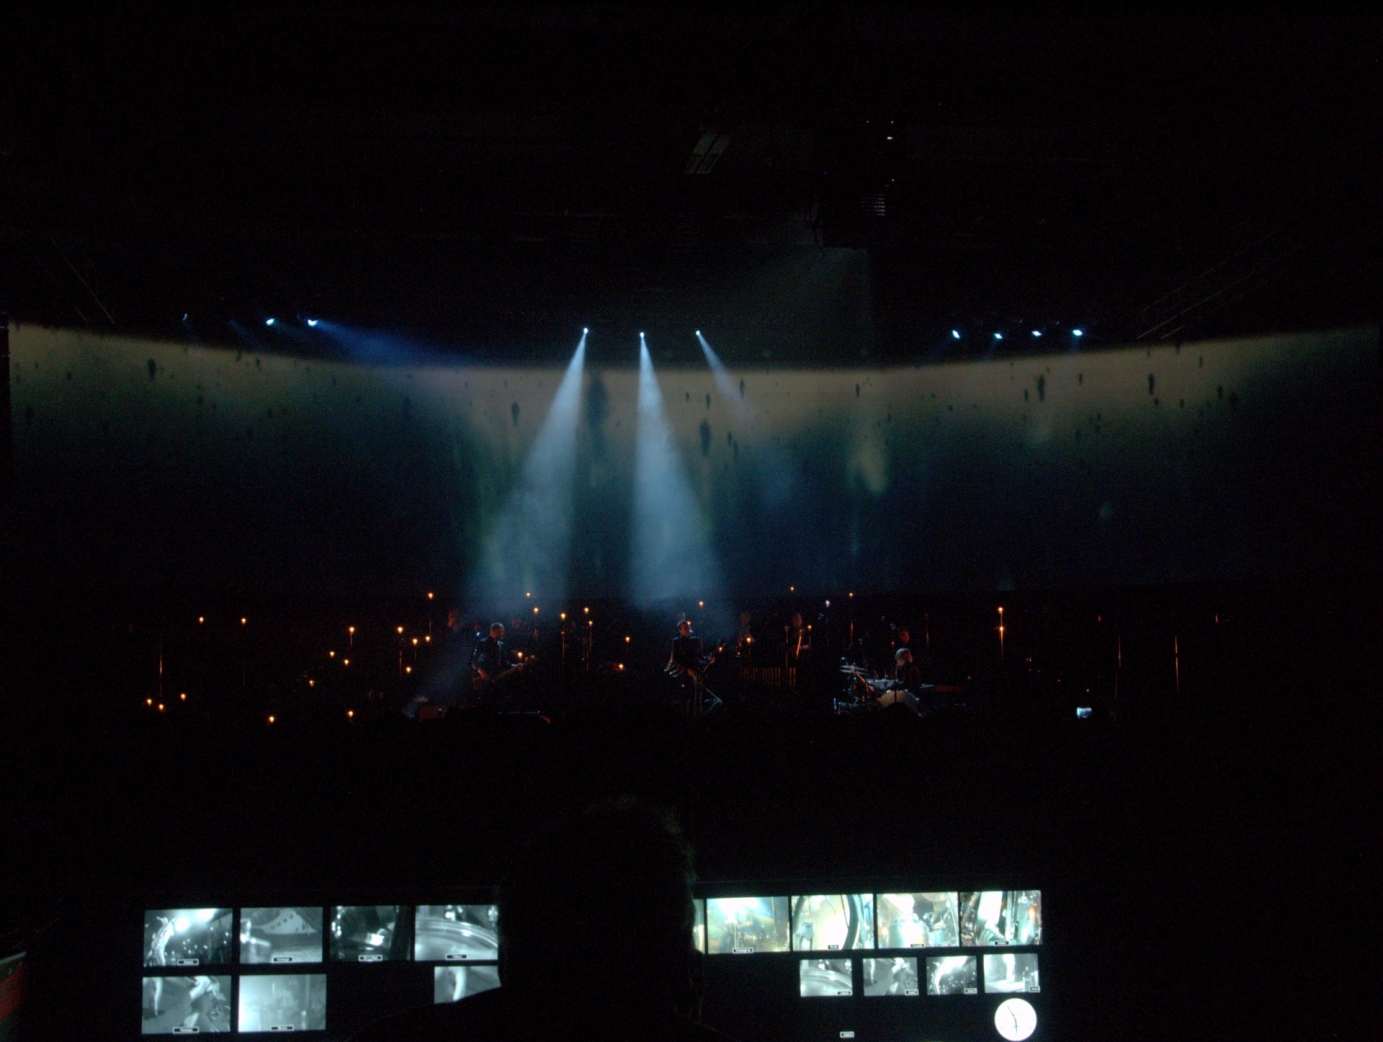 Live visuals for Sigur Ros by Krupa